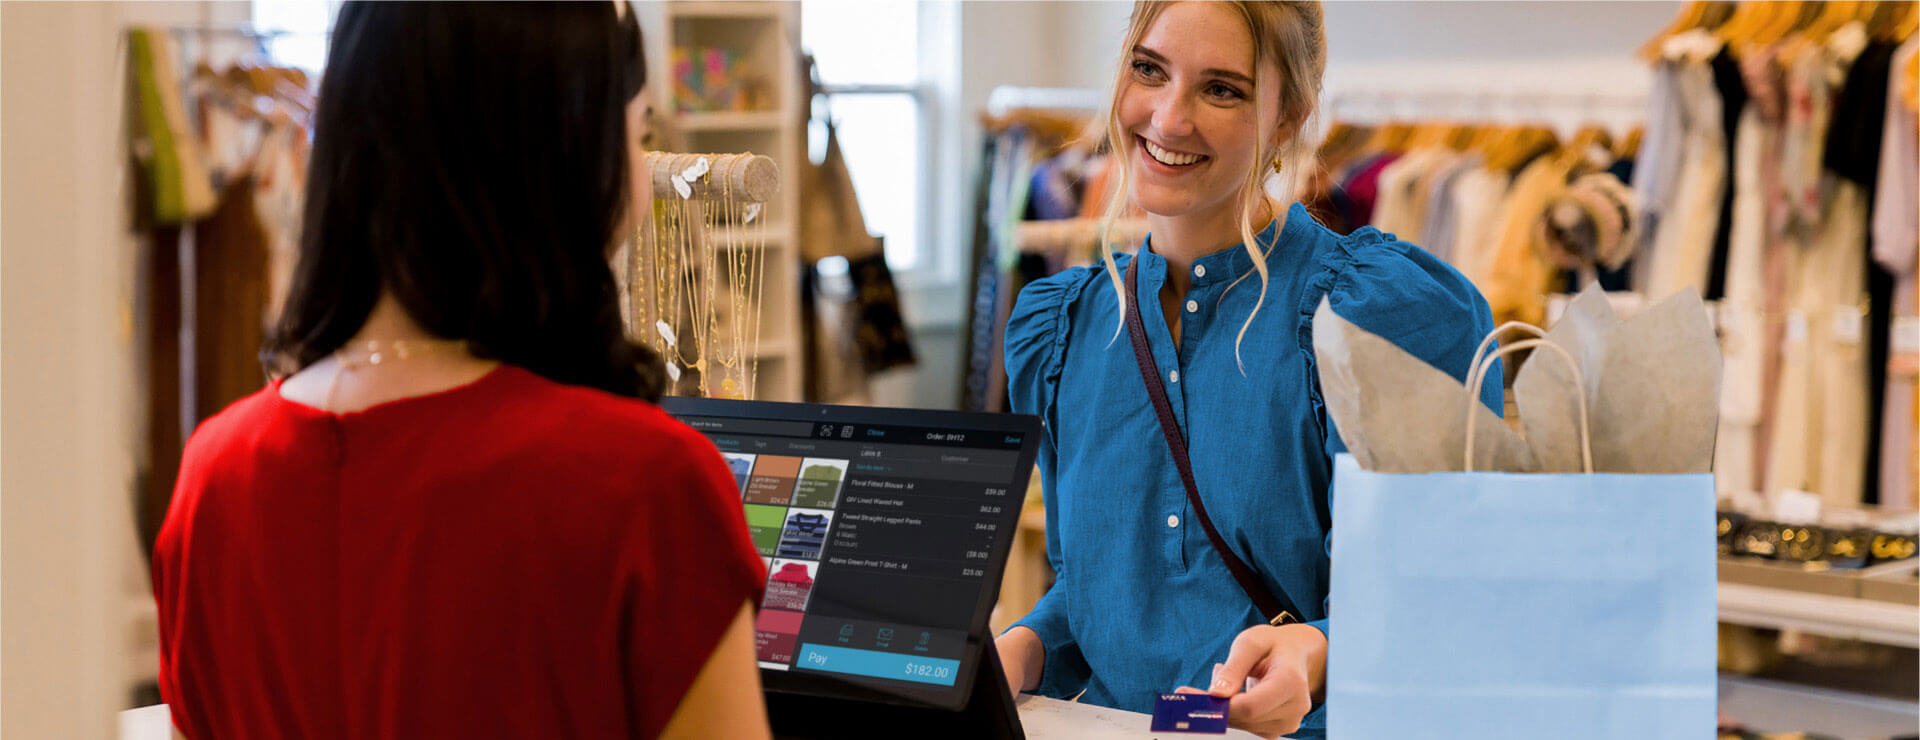 Woman at point-of-sale in clothing store at check out with credit card